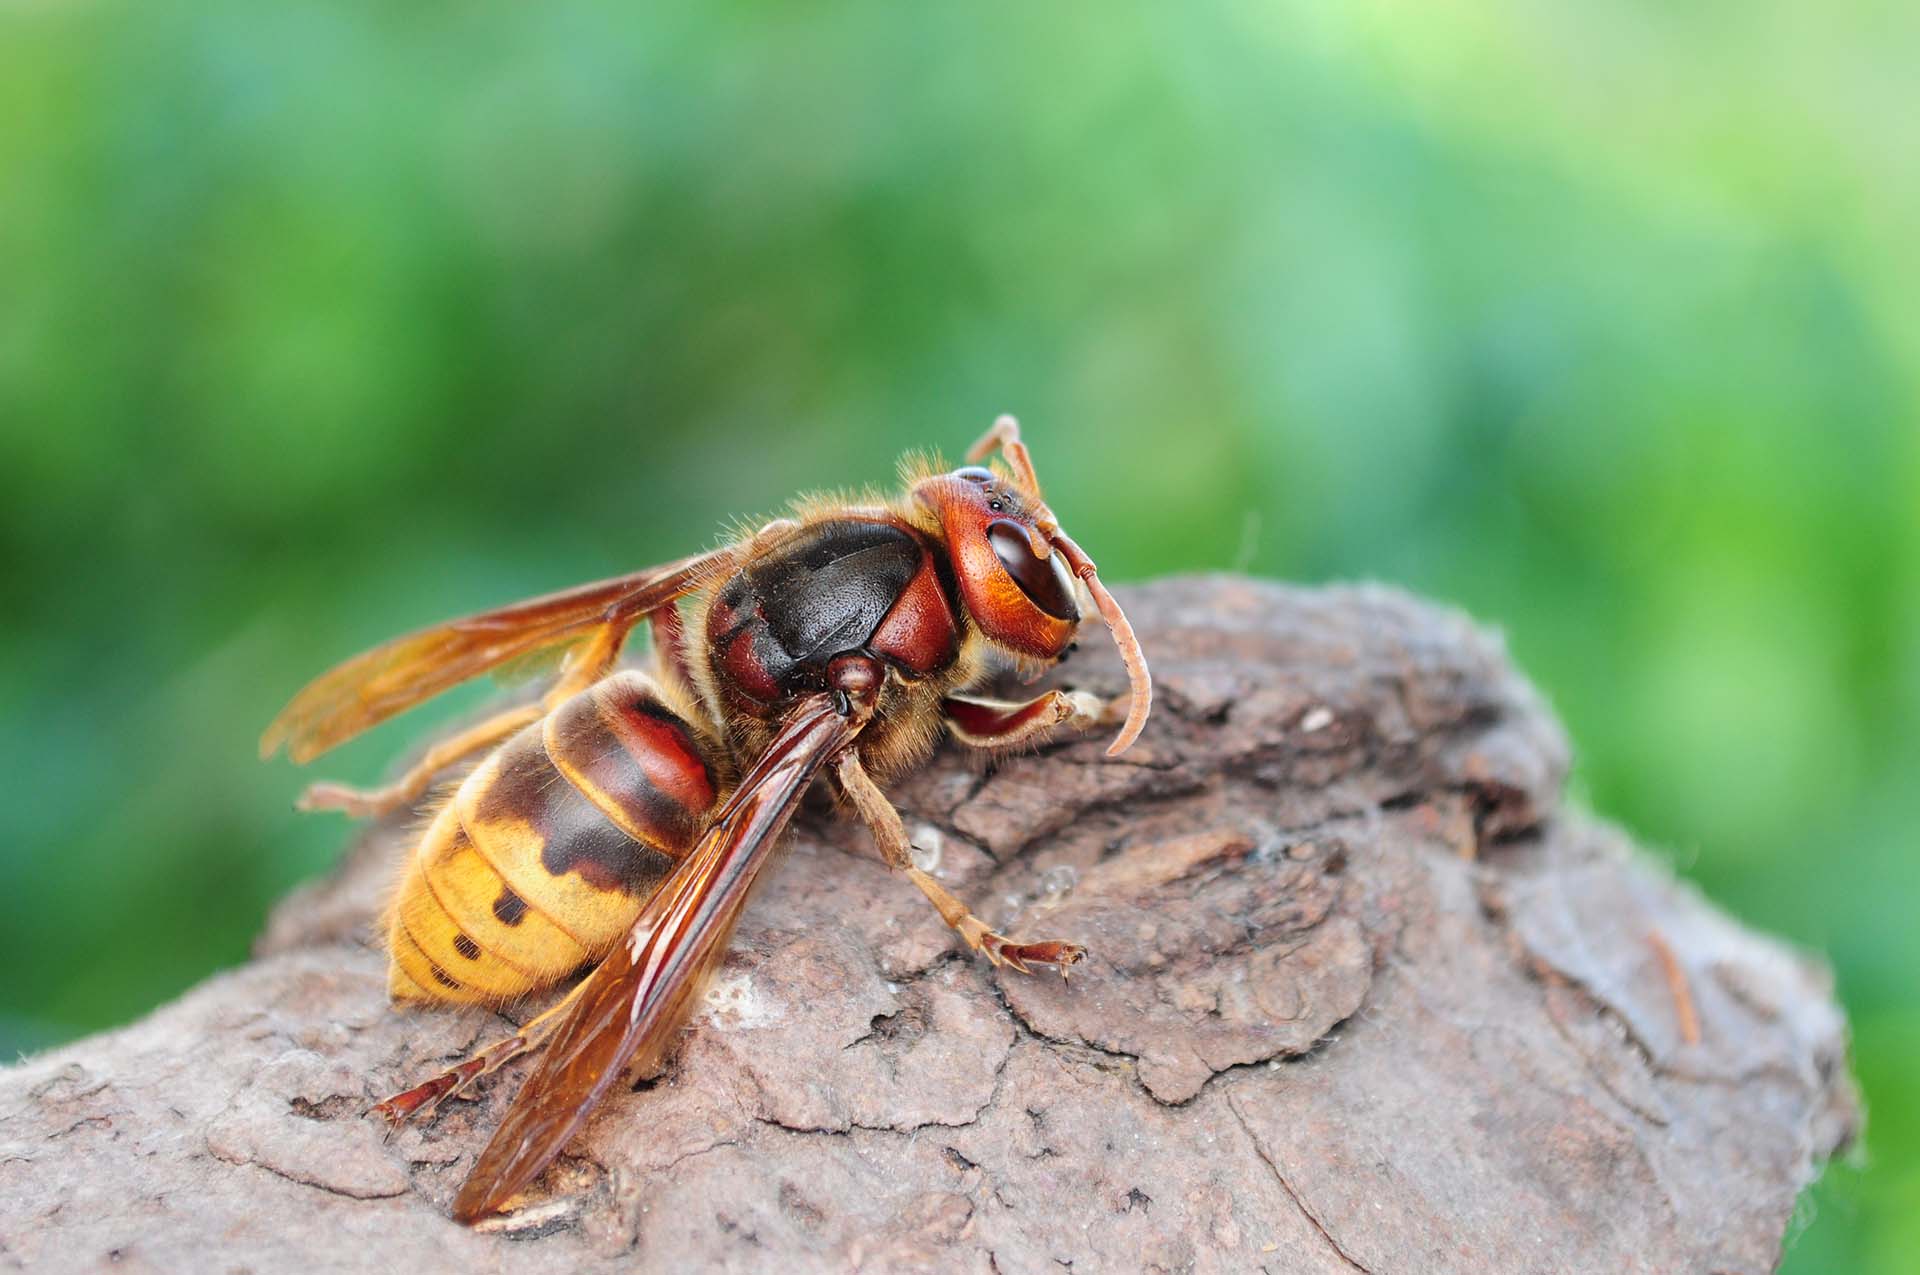 How to Identify a Hornet in the UK image of a European hornet on its nest